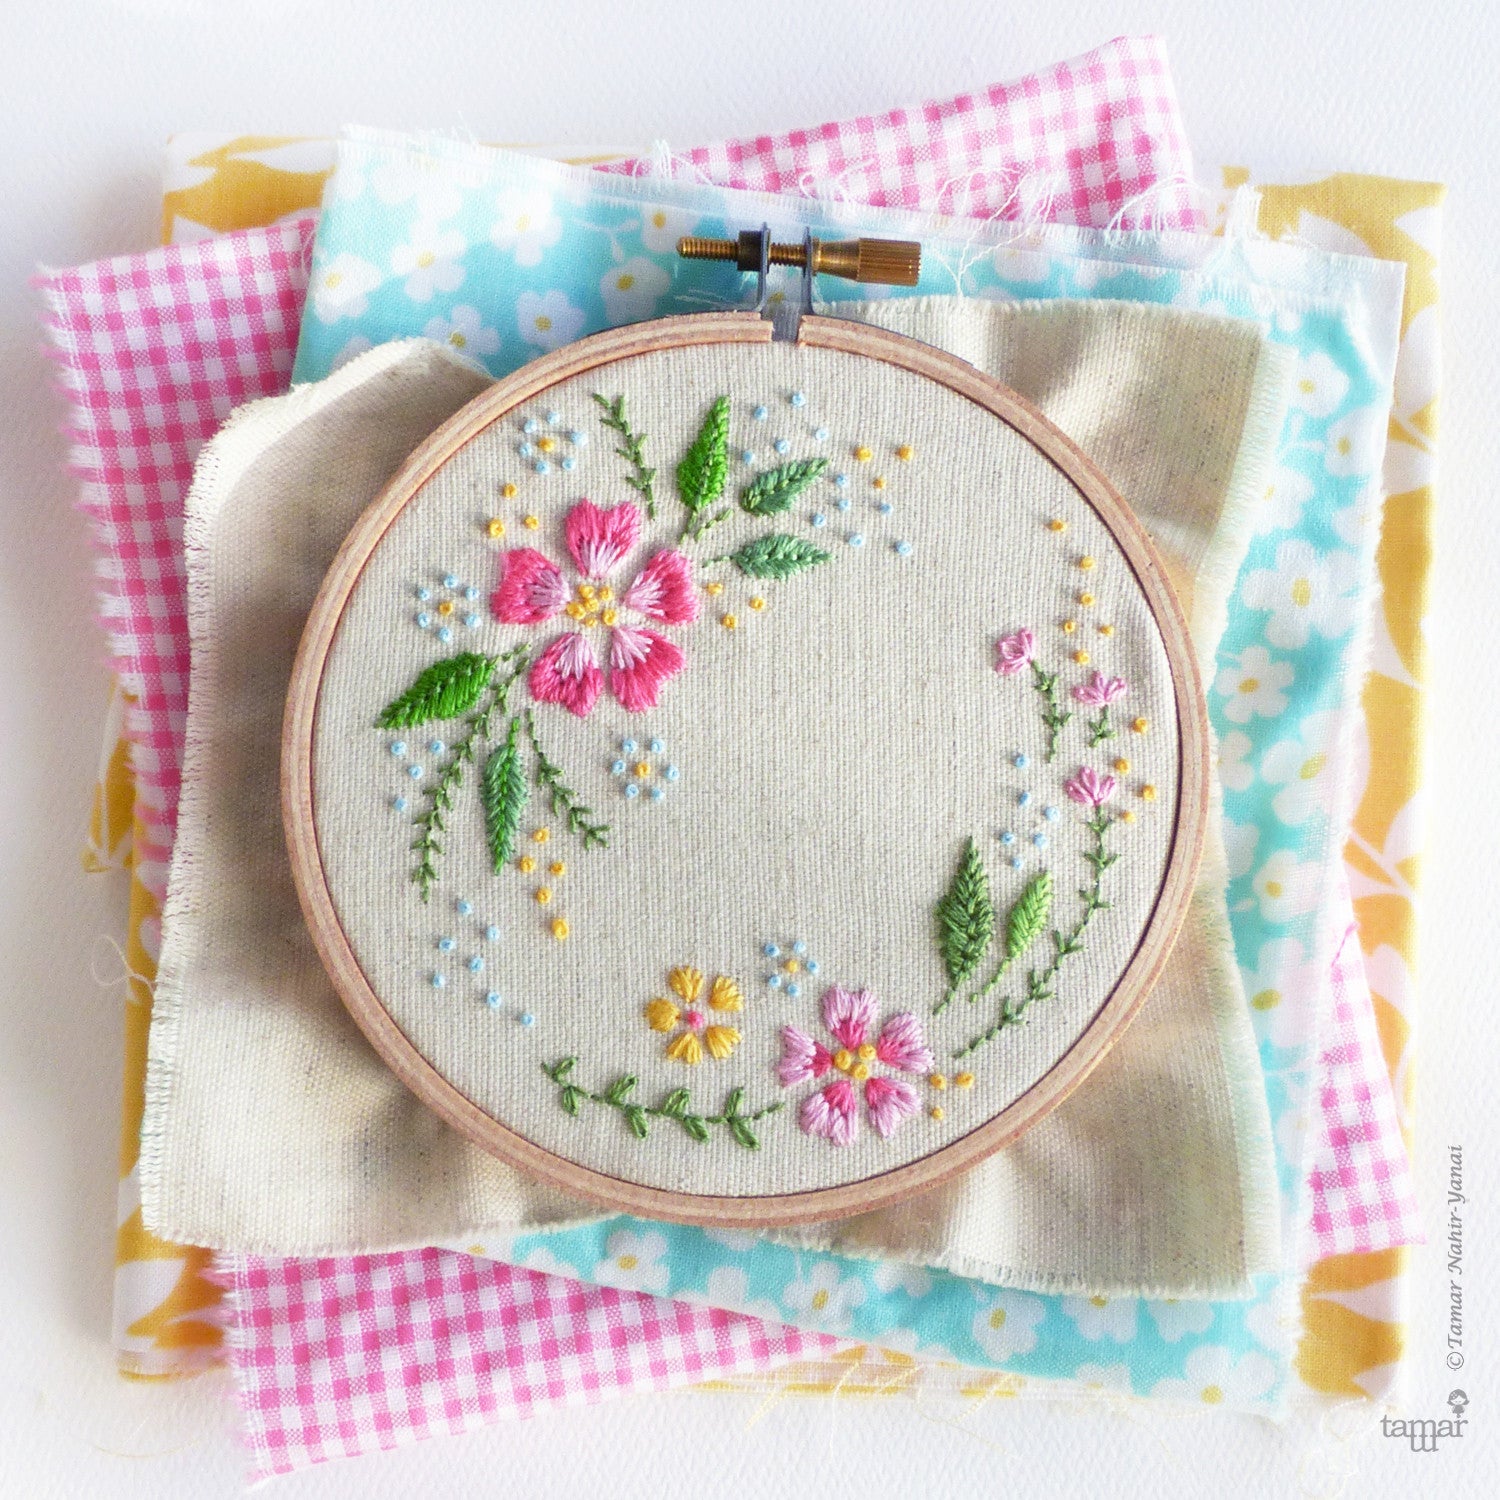 Embroidery Starter Kit for Beginners Stamped Cross Stitch Kits with Cute Flowers and Plants Patterns with Embroidery Hoops and Color Threads for